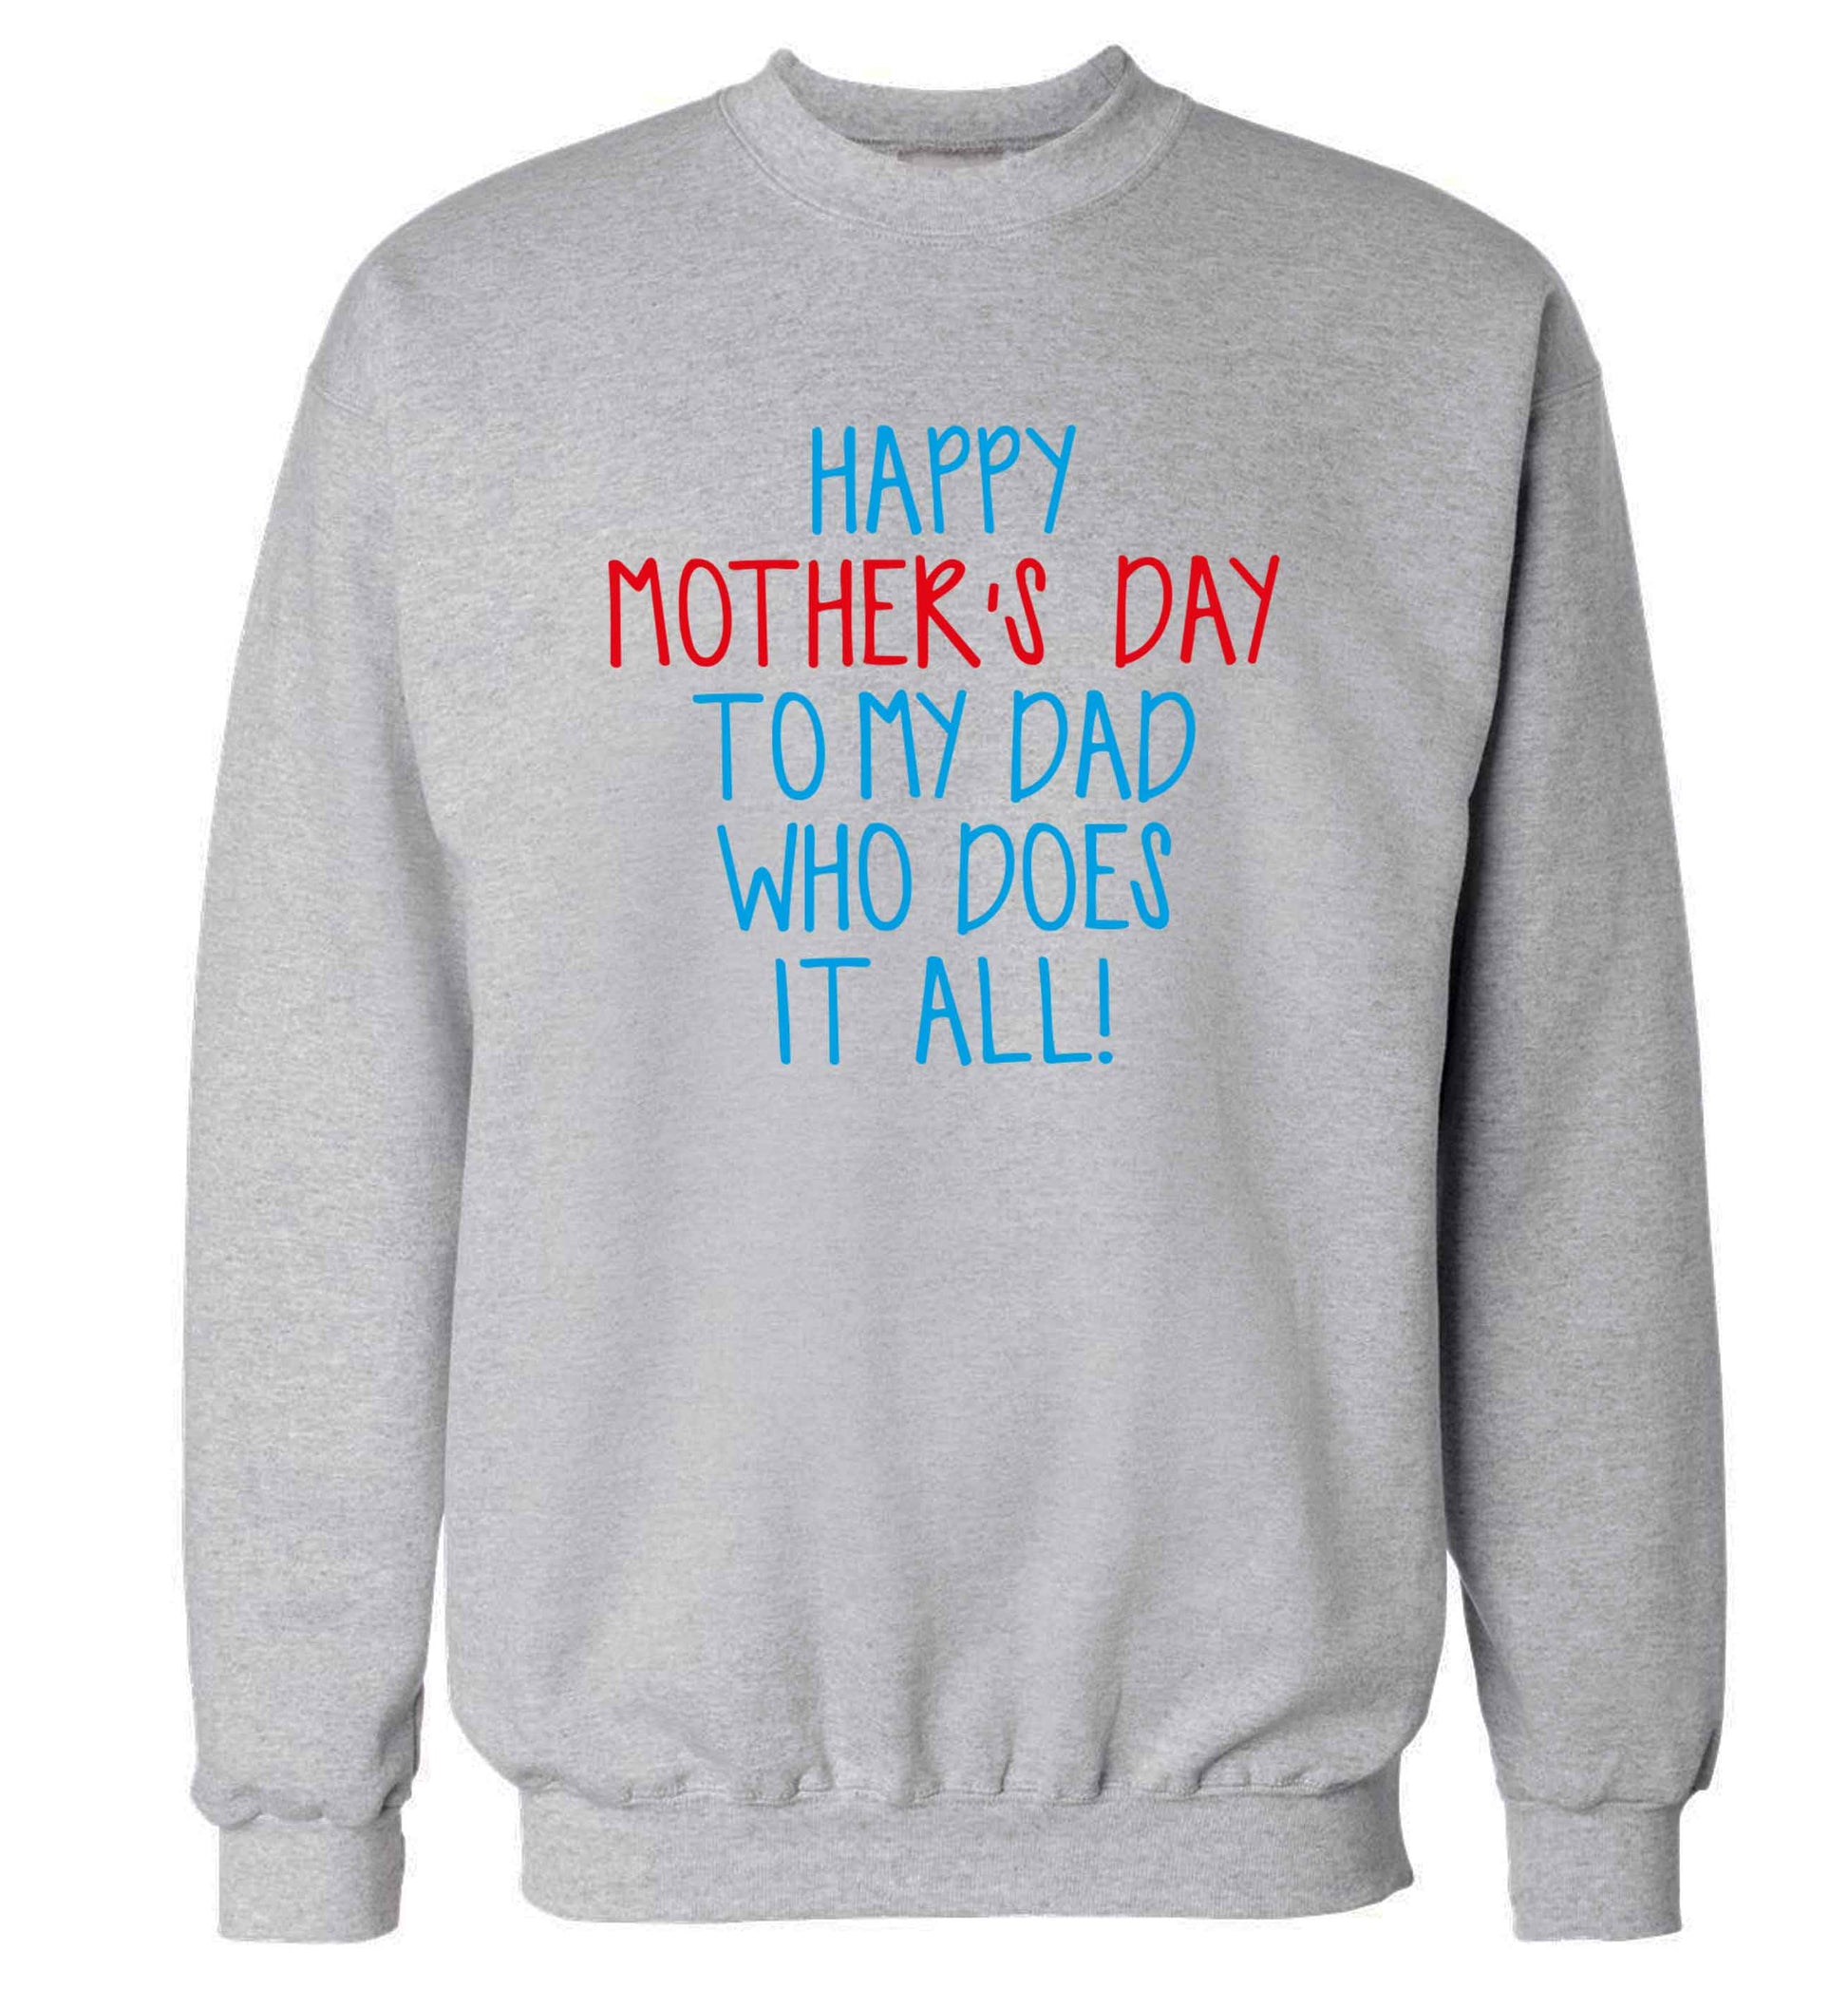 Happy mother's day to my dad who does it all! adult's unisex grey sweater 2XL